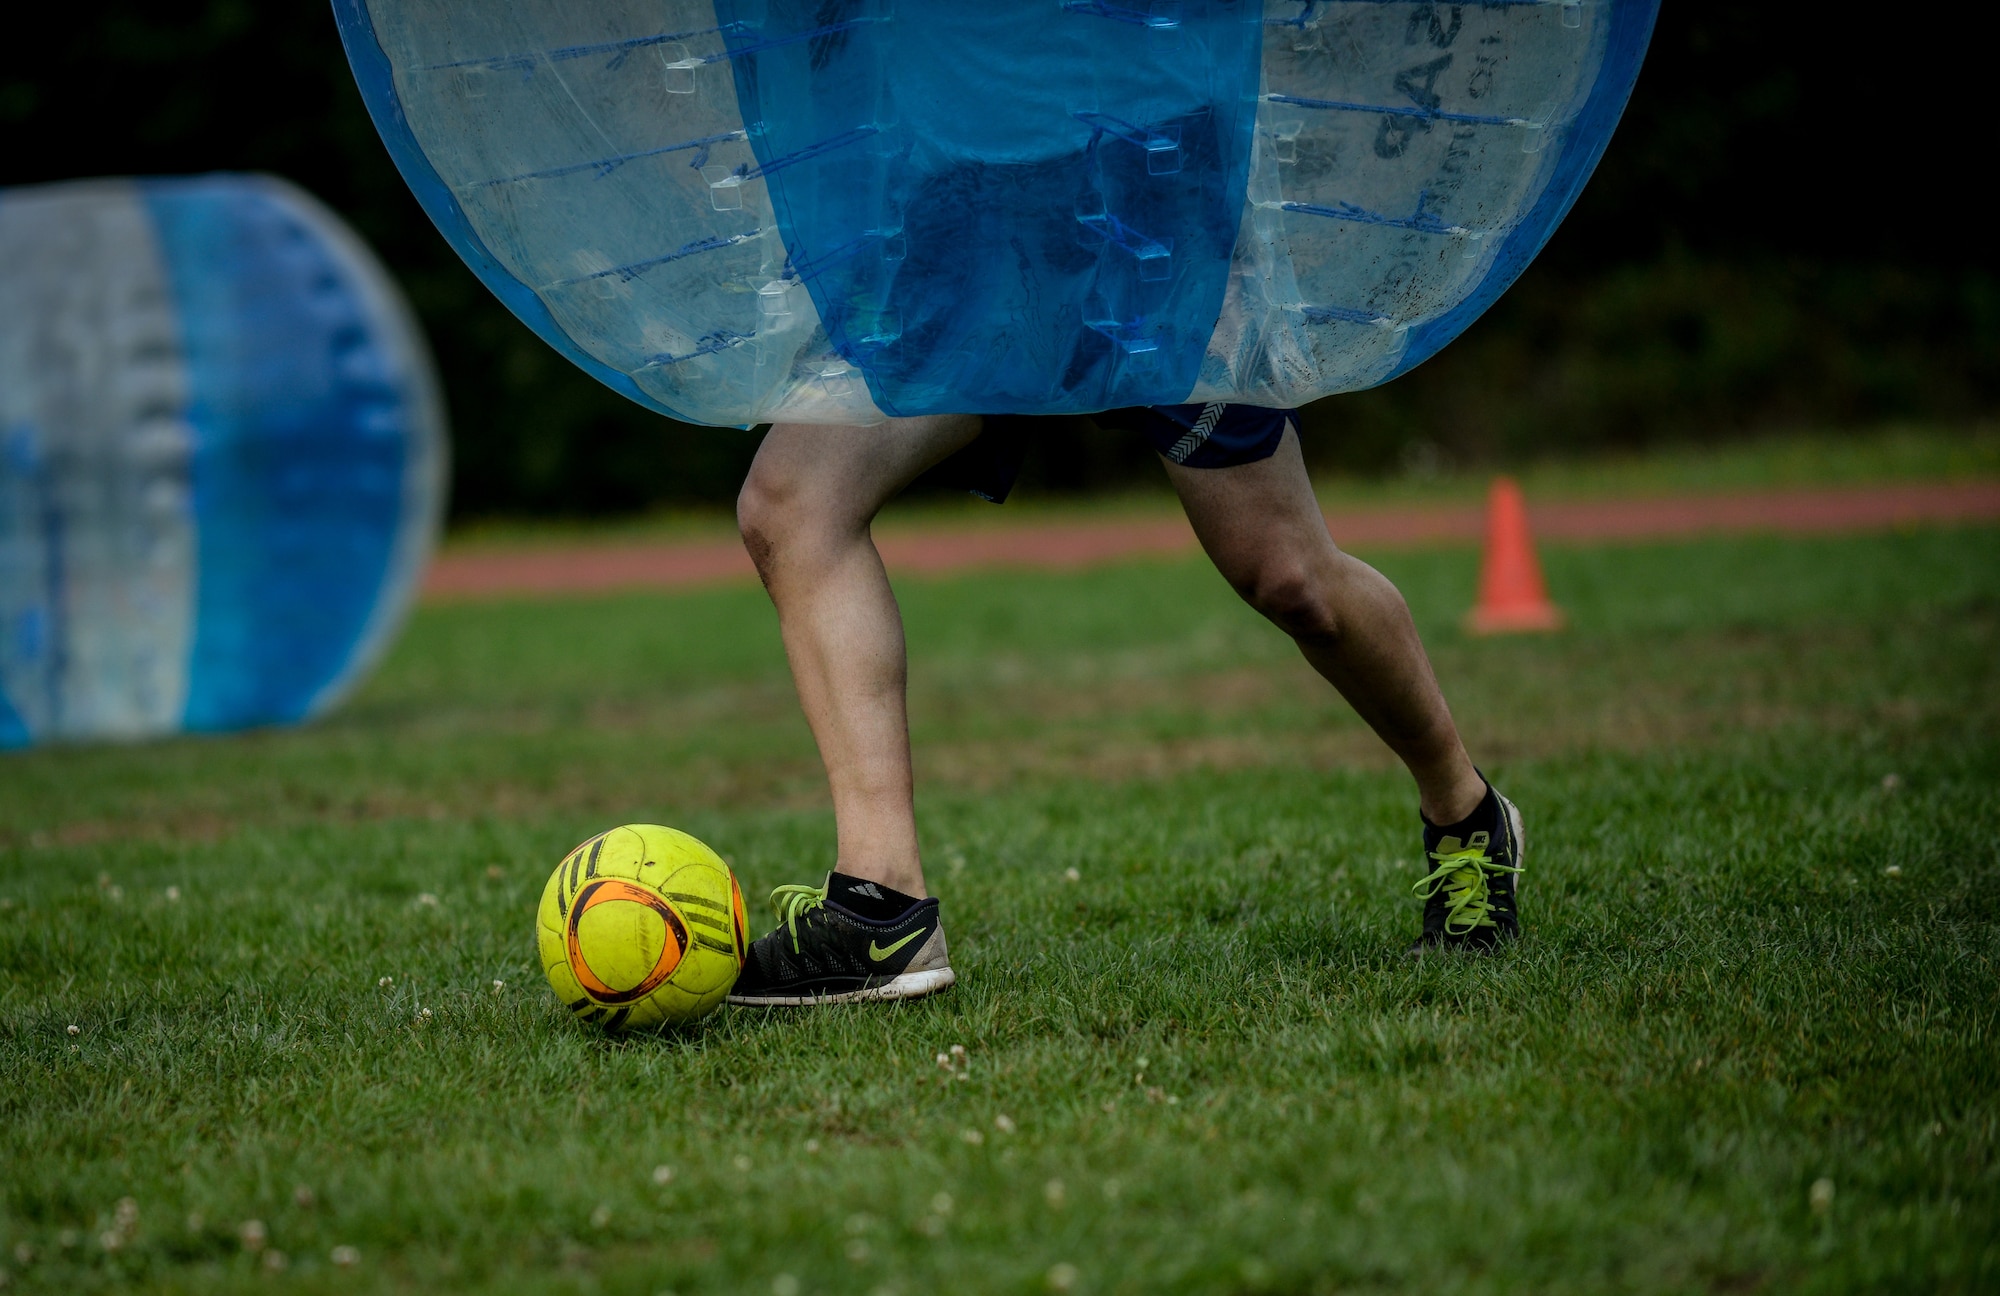 An Airman kicks a soccer ball during a bubble soccer game Sept. 15, 2015, on Vogelweh Military Complex, Germany.  The soccer game was a fundraiser that kicked off the Combined Federal Campaign-Overseas annual fundraiser. (U.S. Air Force photo/Senior Airman Nicole Sikorski)